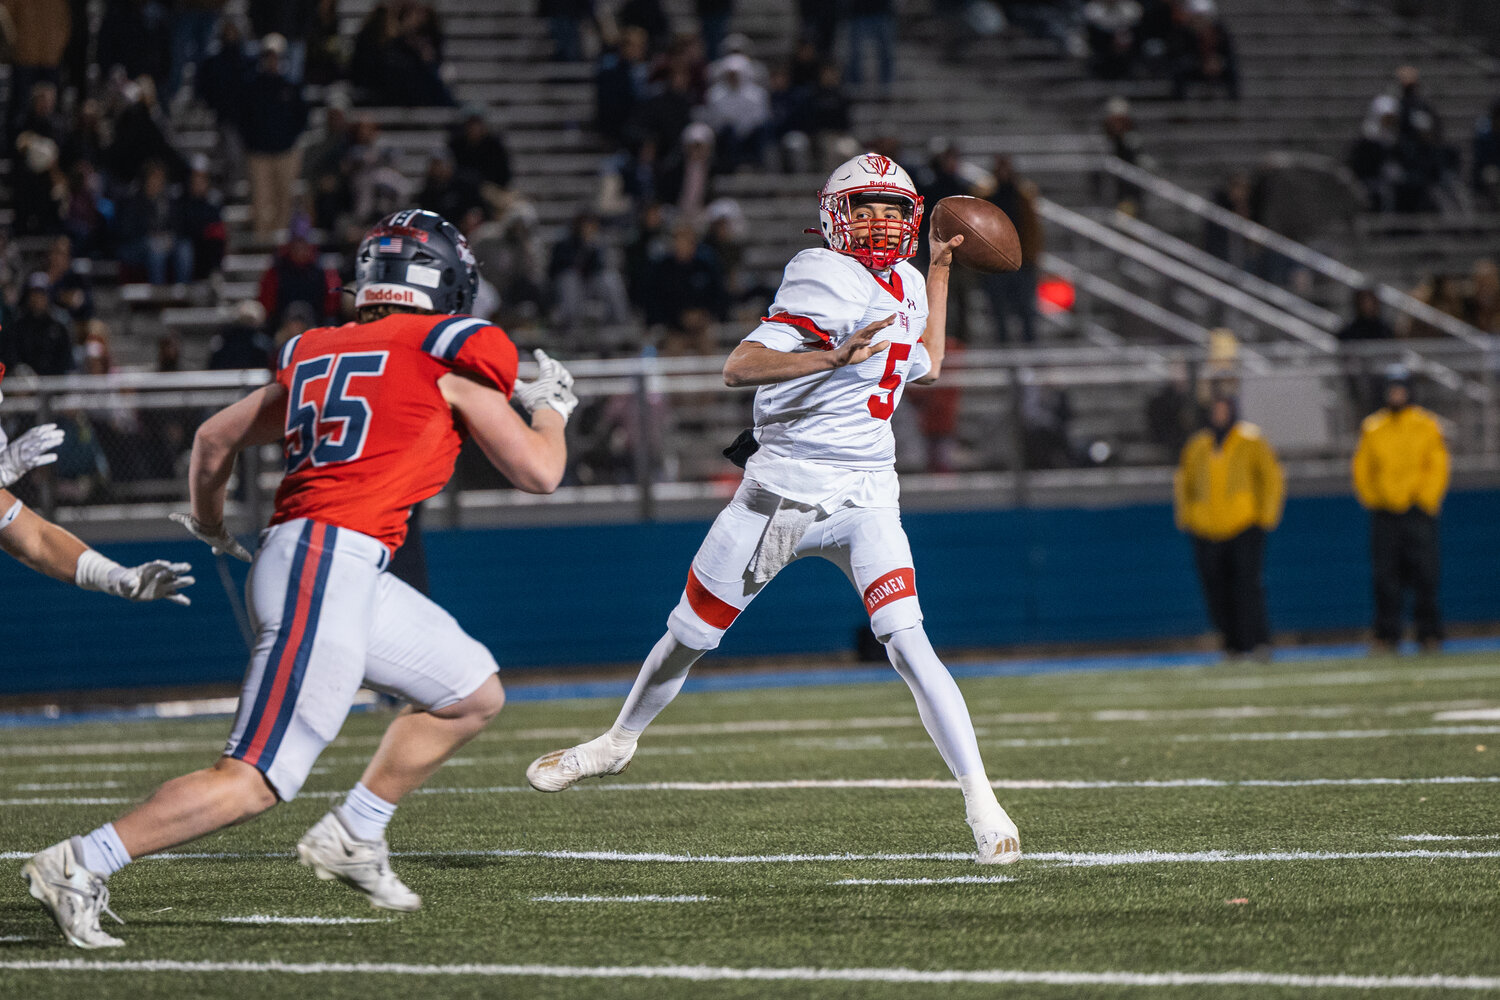 Junior quarterback Thomas Costarelli led the Redmen to victory, completing 9 of 19 passes for 244 yards.